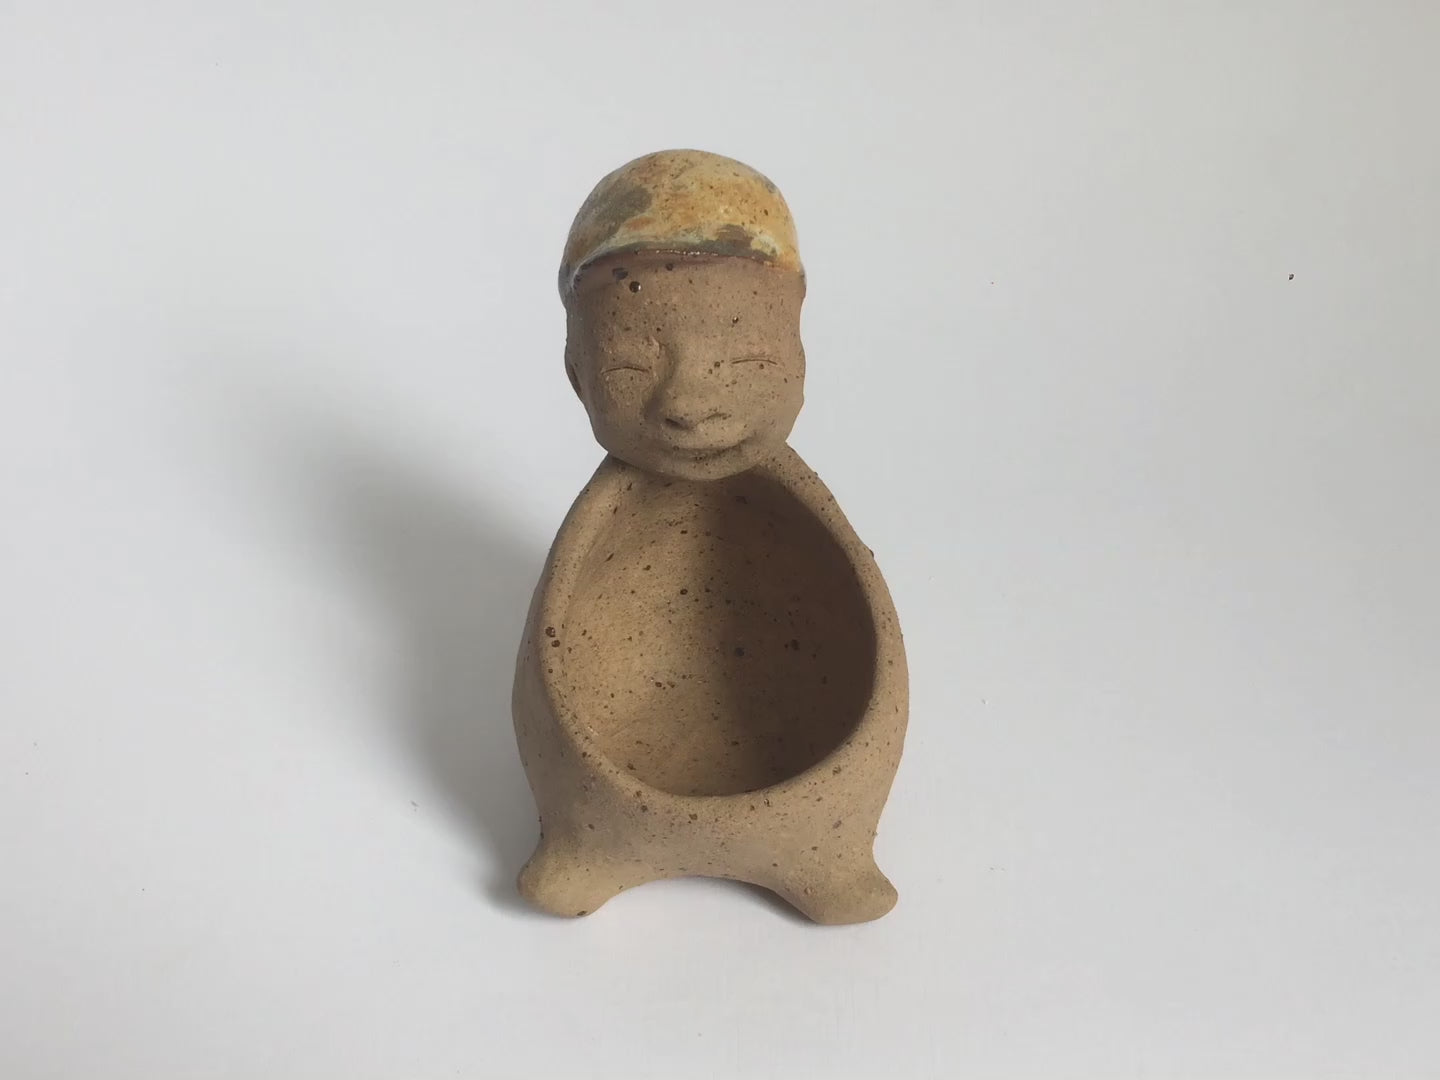 Video of brown unglazed figurative ceramic object with speckle glazed accent on top